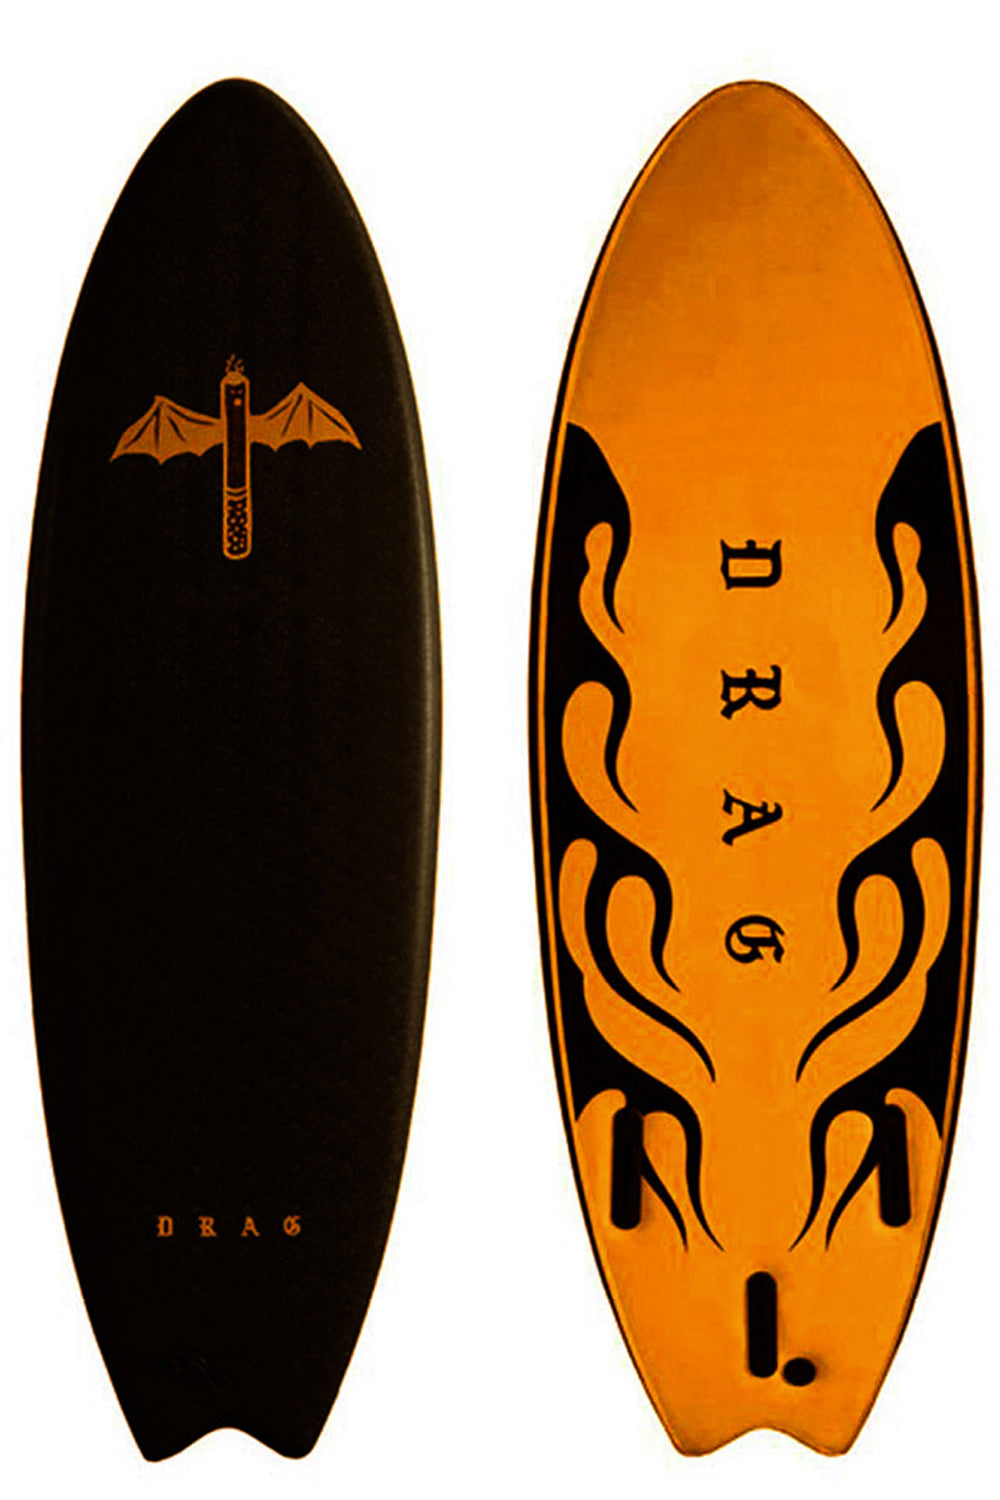 Drag Board Co Dart 5’6 Thruster Softboard - Comes with fins